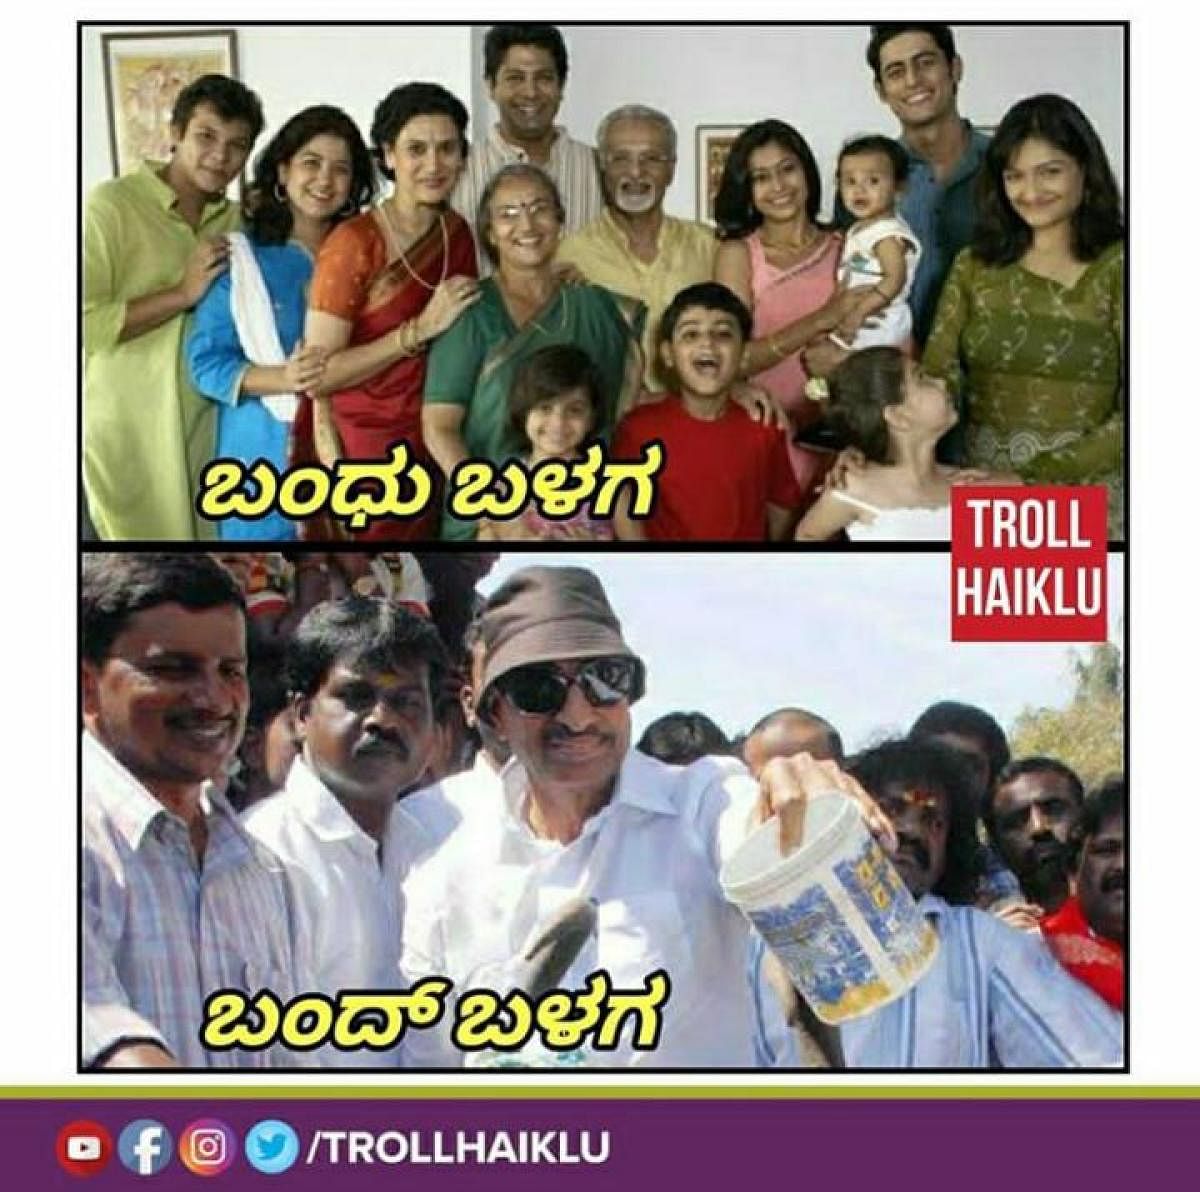 The top photo says ‘Bandhu balaga’ (relatives) while the second says ‘Bandh balaga’ (Bandh crowd). Offended parties sometimes serve notices on meme creators.